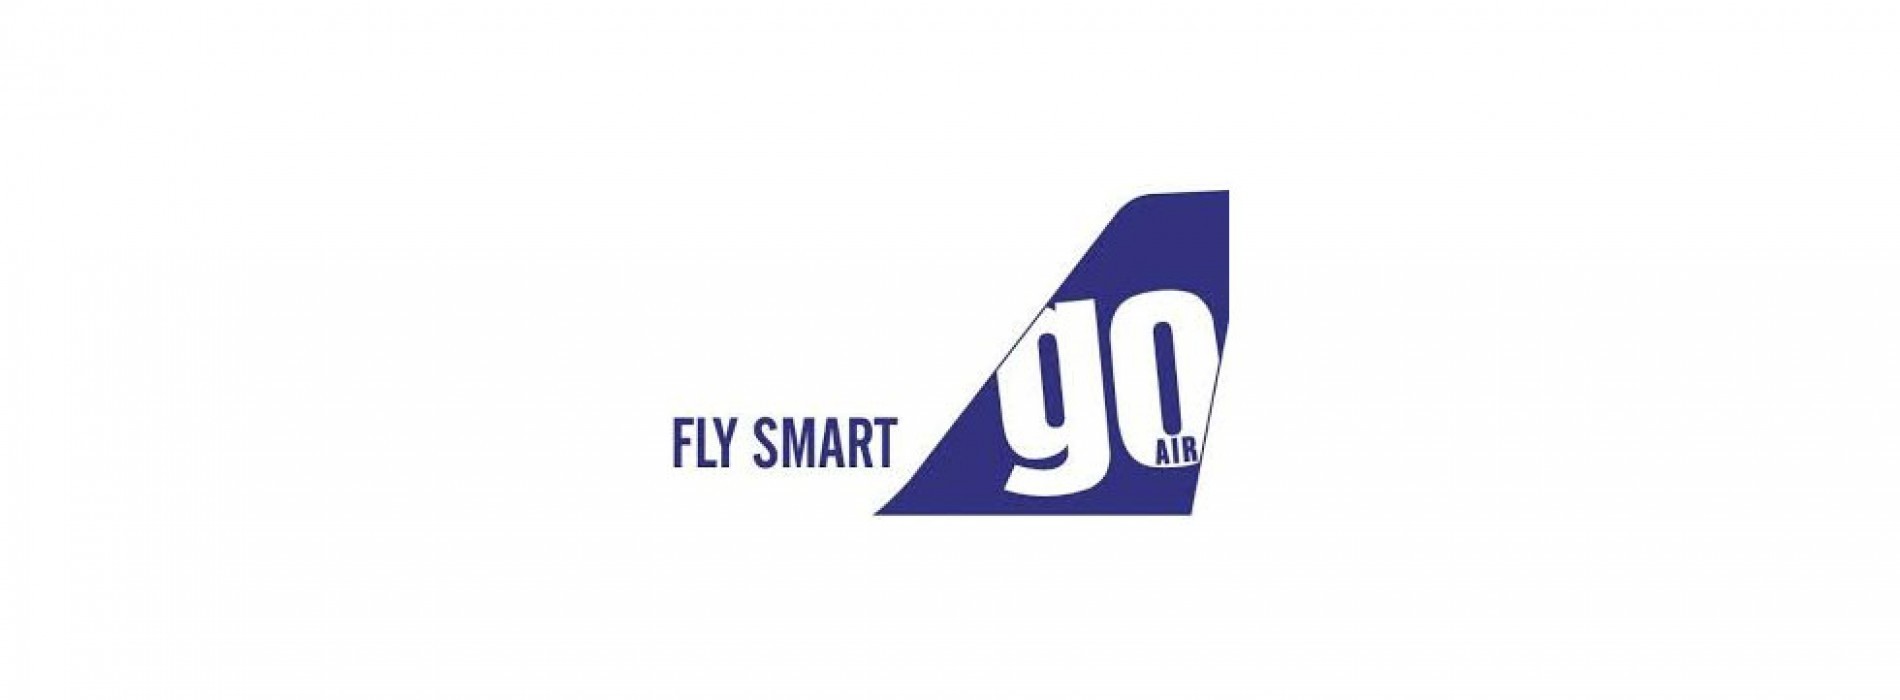 GoAir offers flight tickets from Rs 999 in monsoon sale